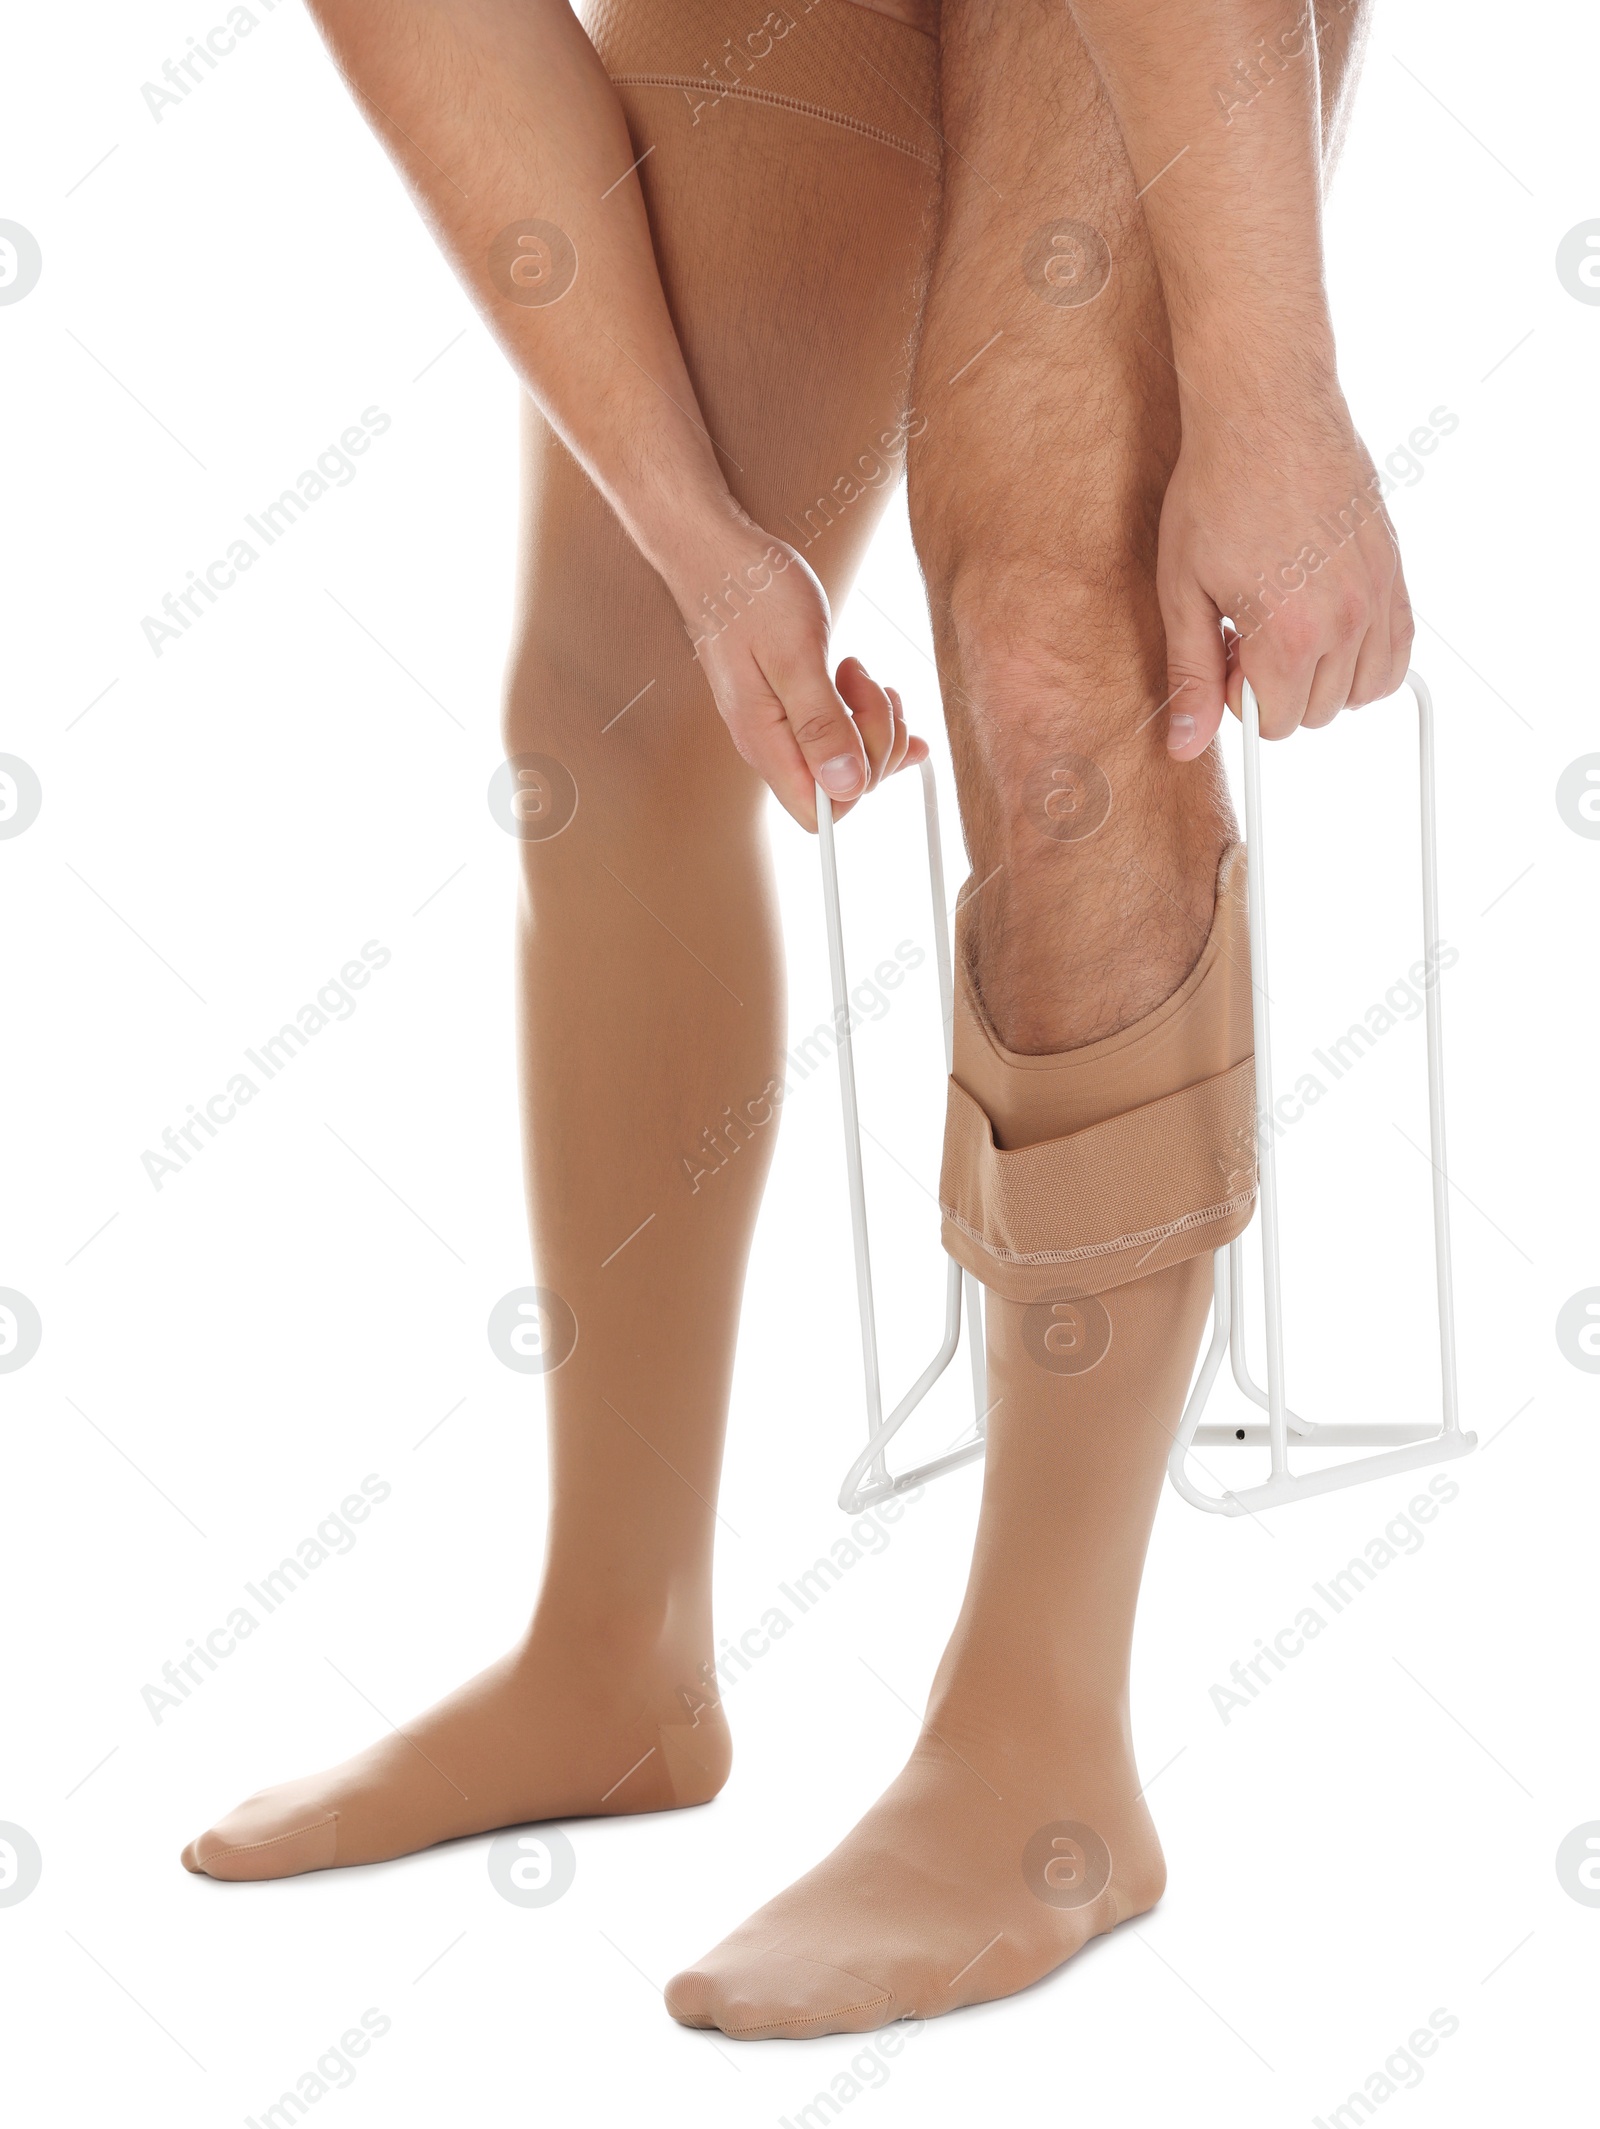 Photo of Man putting on compression garment with stocking donner against white background, closeup